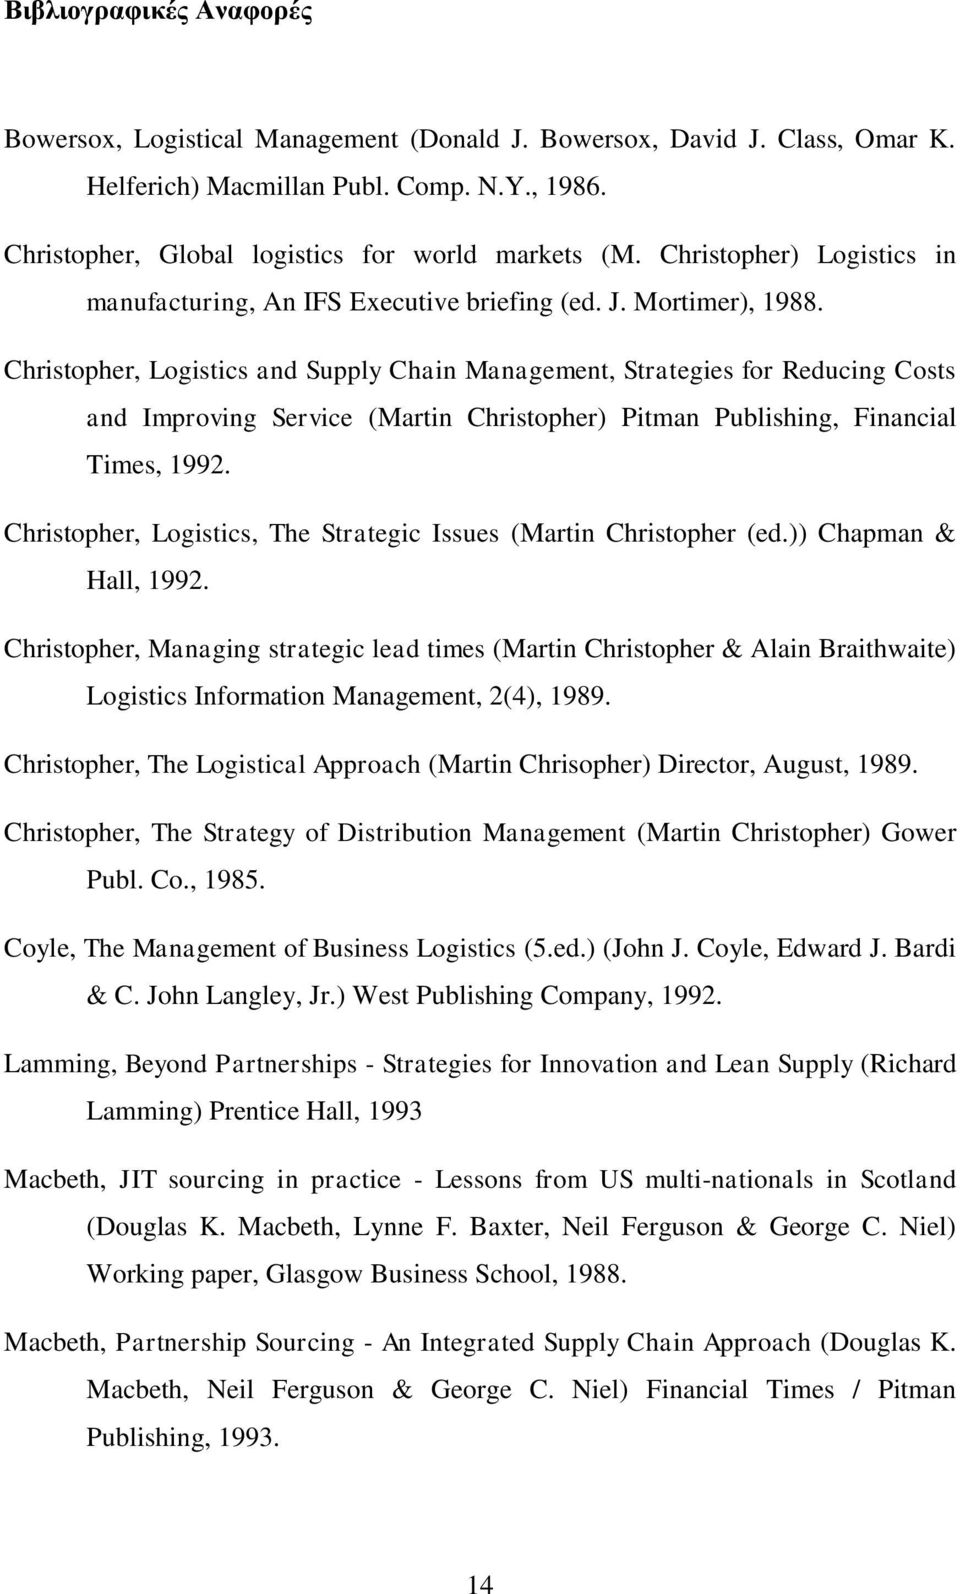 Christopher, Logistics and Supply Chain Management, Strategies for Reducing Costs and Improving Service (Martin Christopher) Pitman Publishing, Financial Times, 1992.